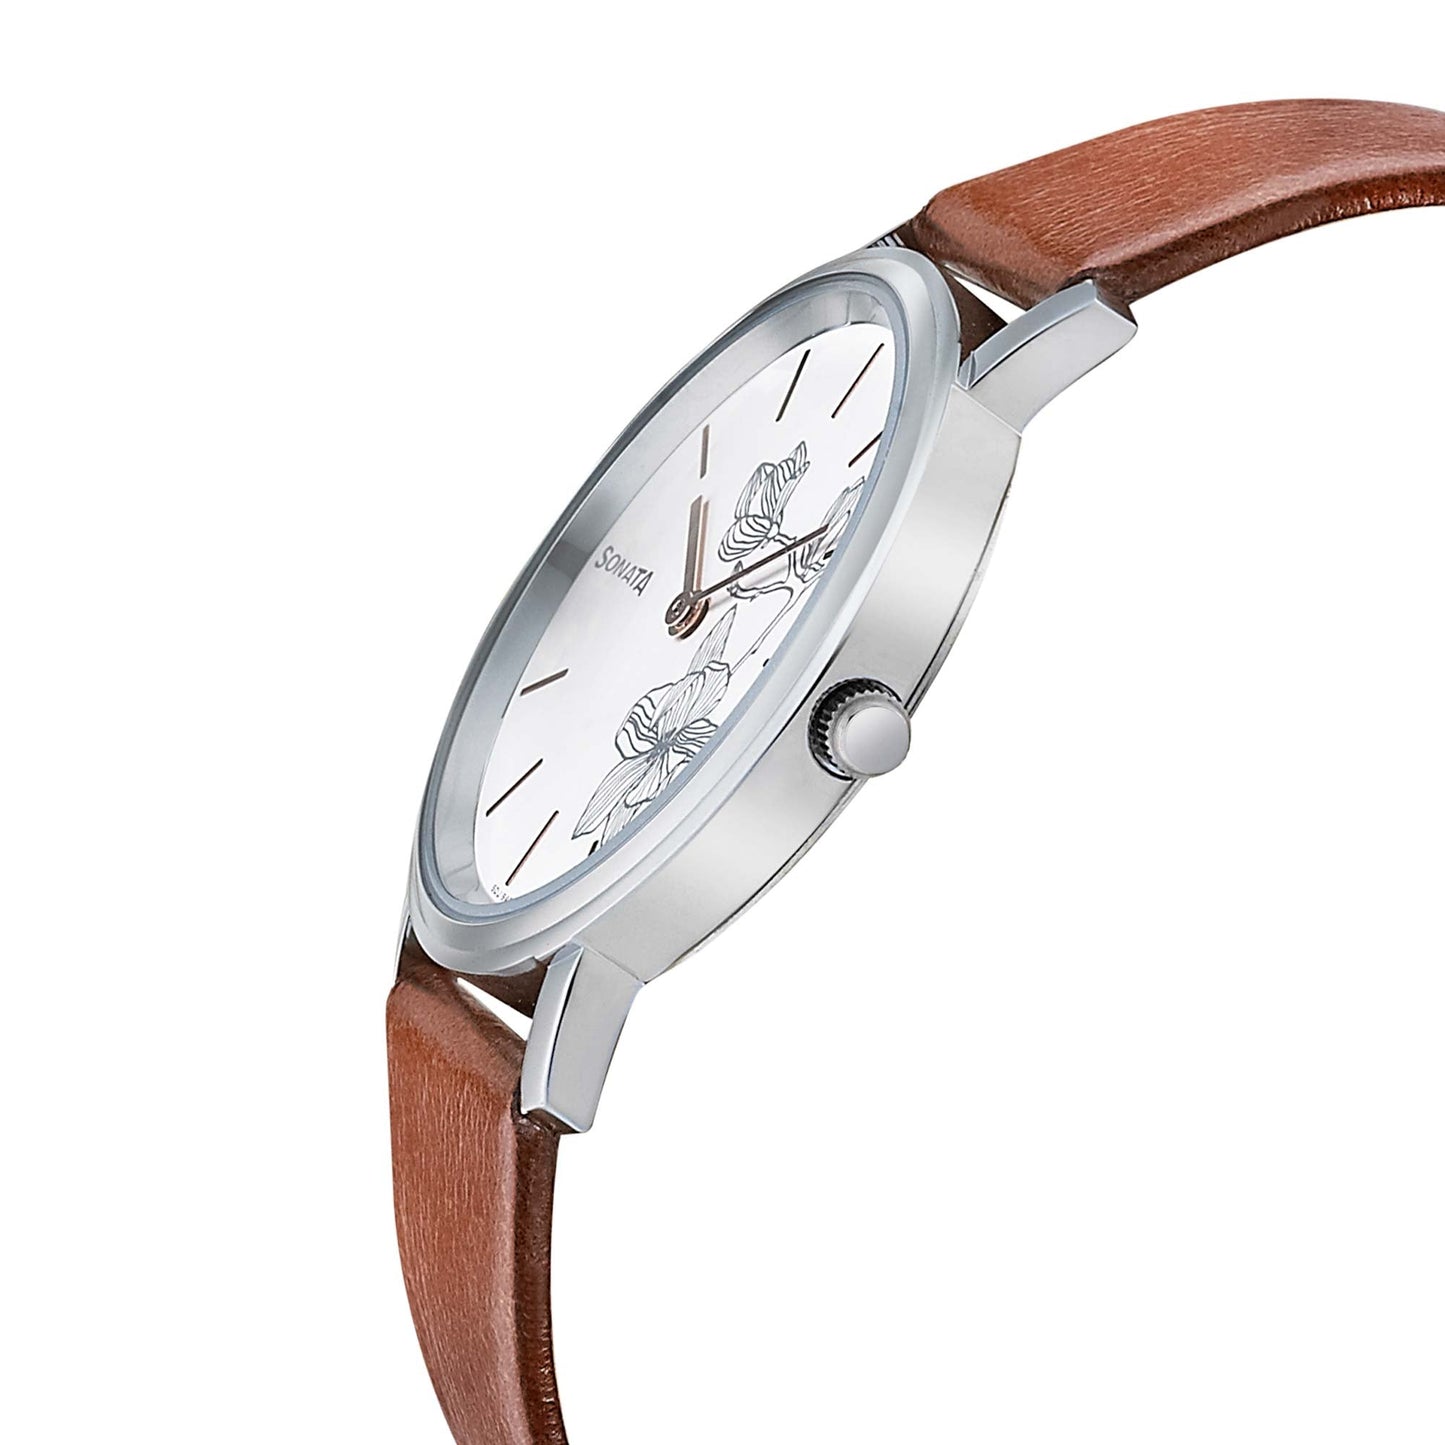 Sonata Silver Lining White Dial Women Watch With Leather Strap